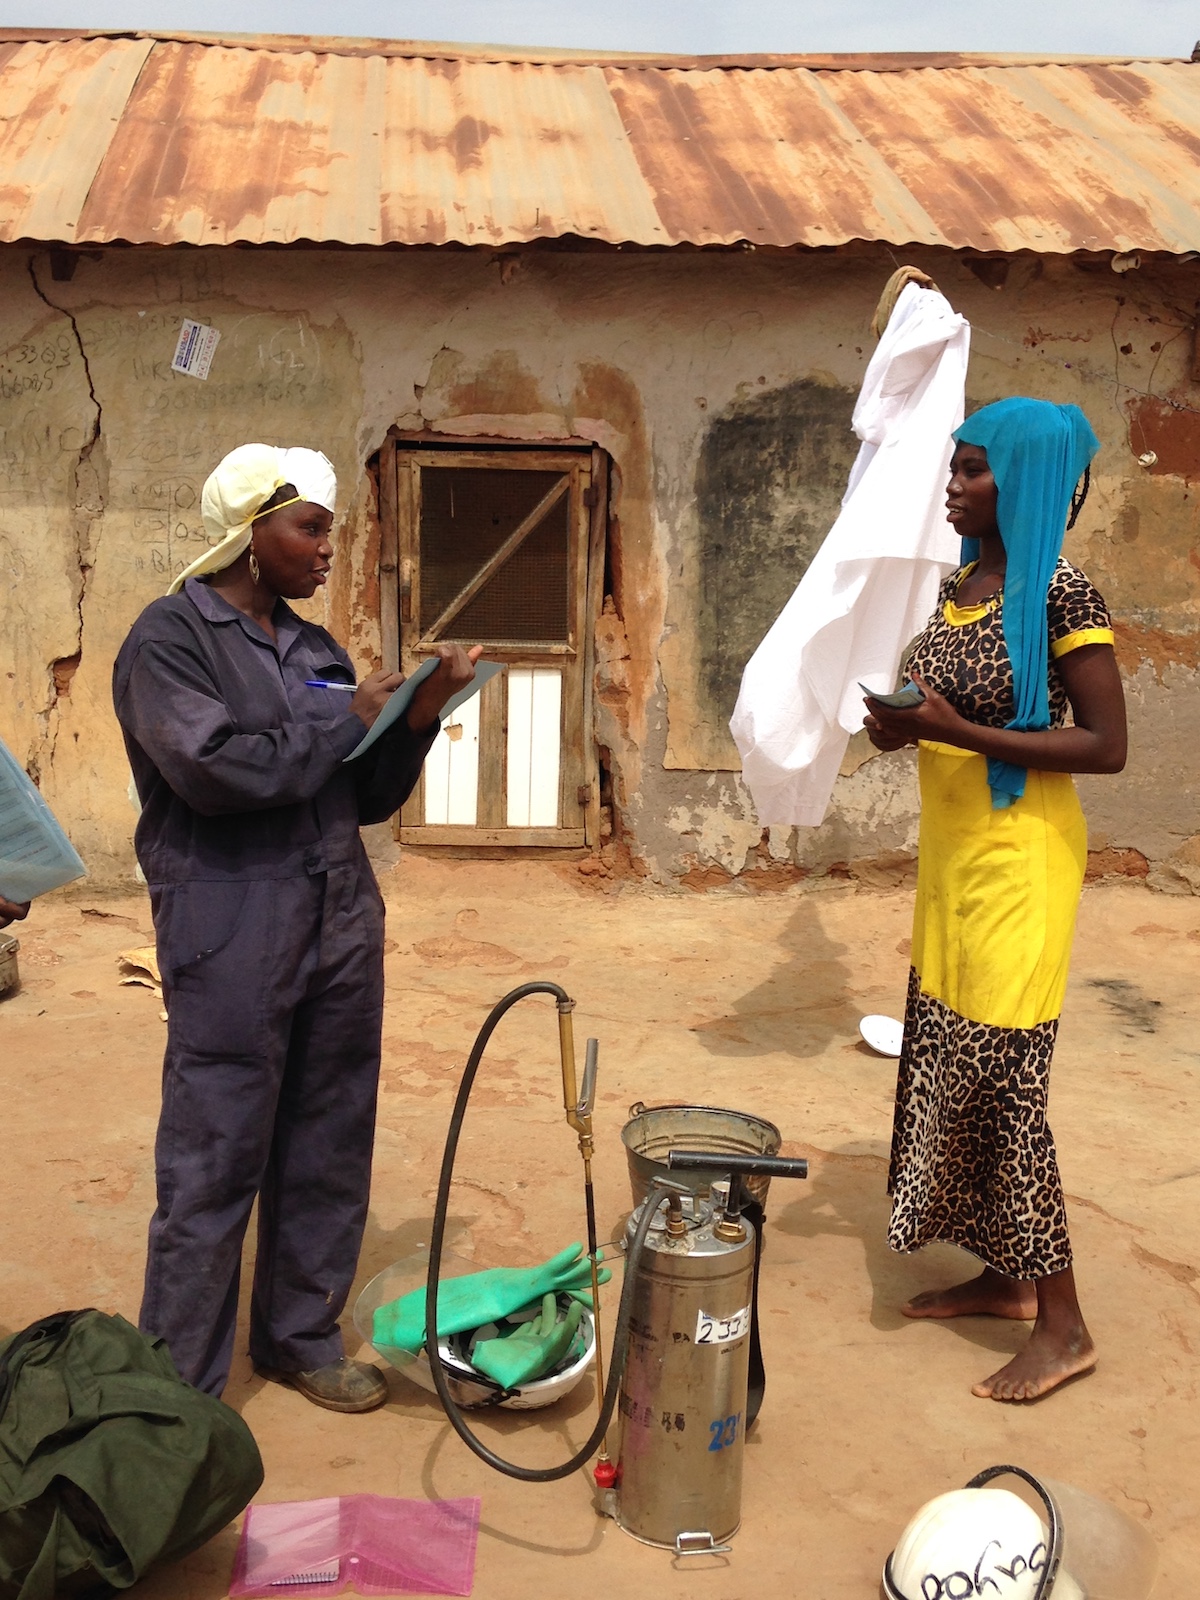 Female spray operator collecting household information